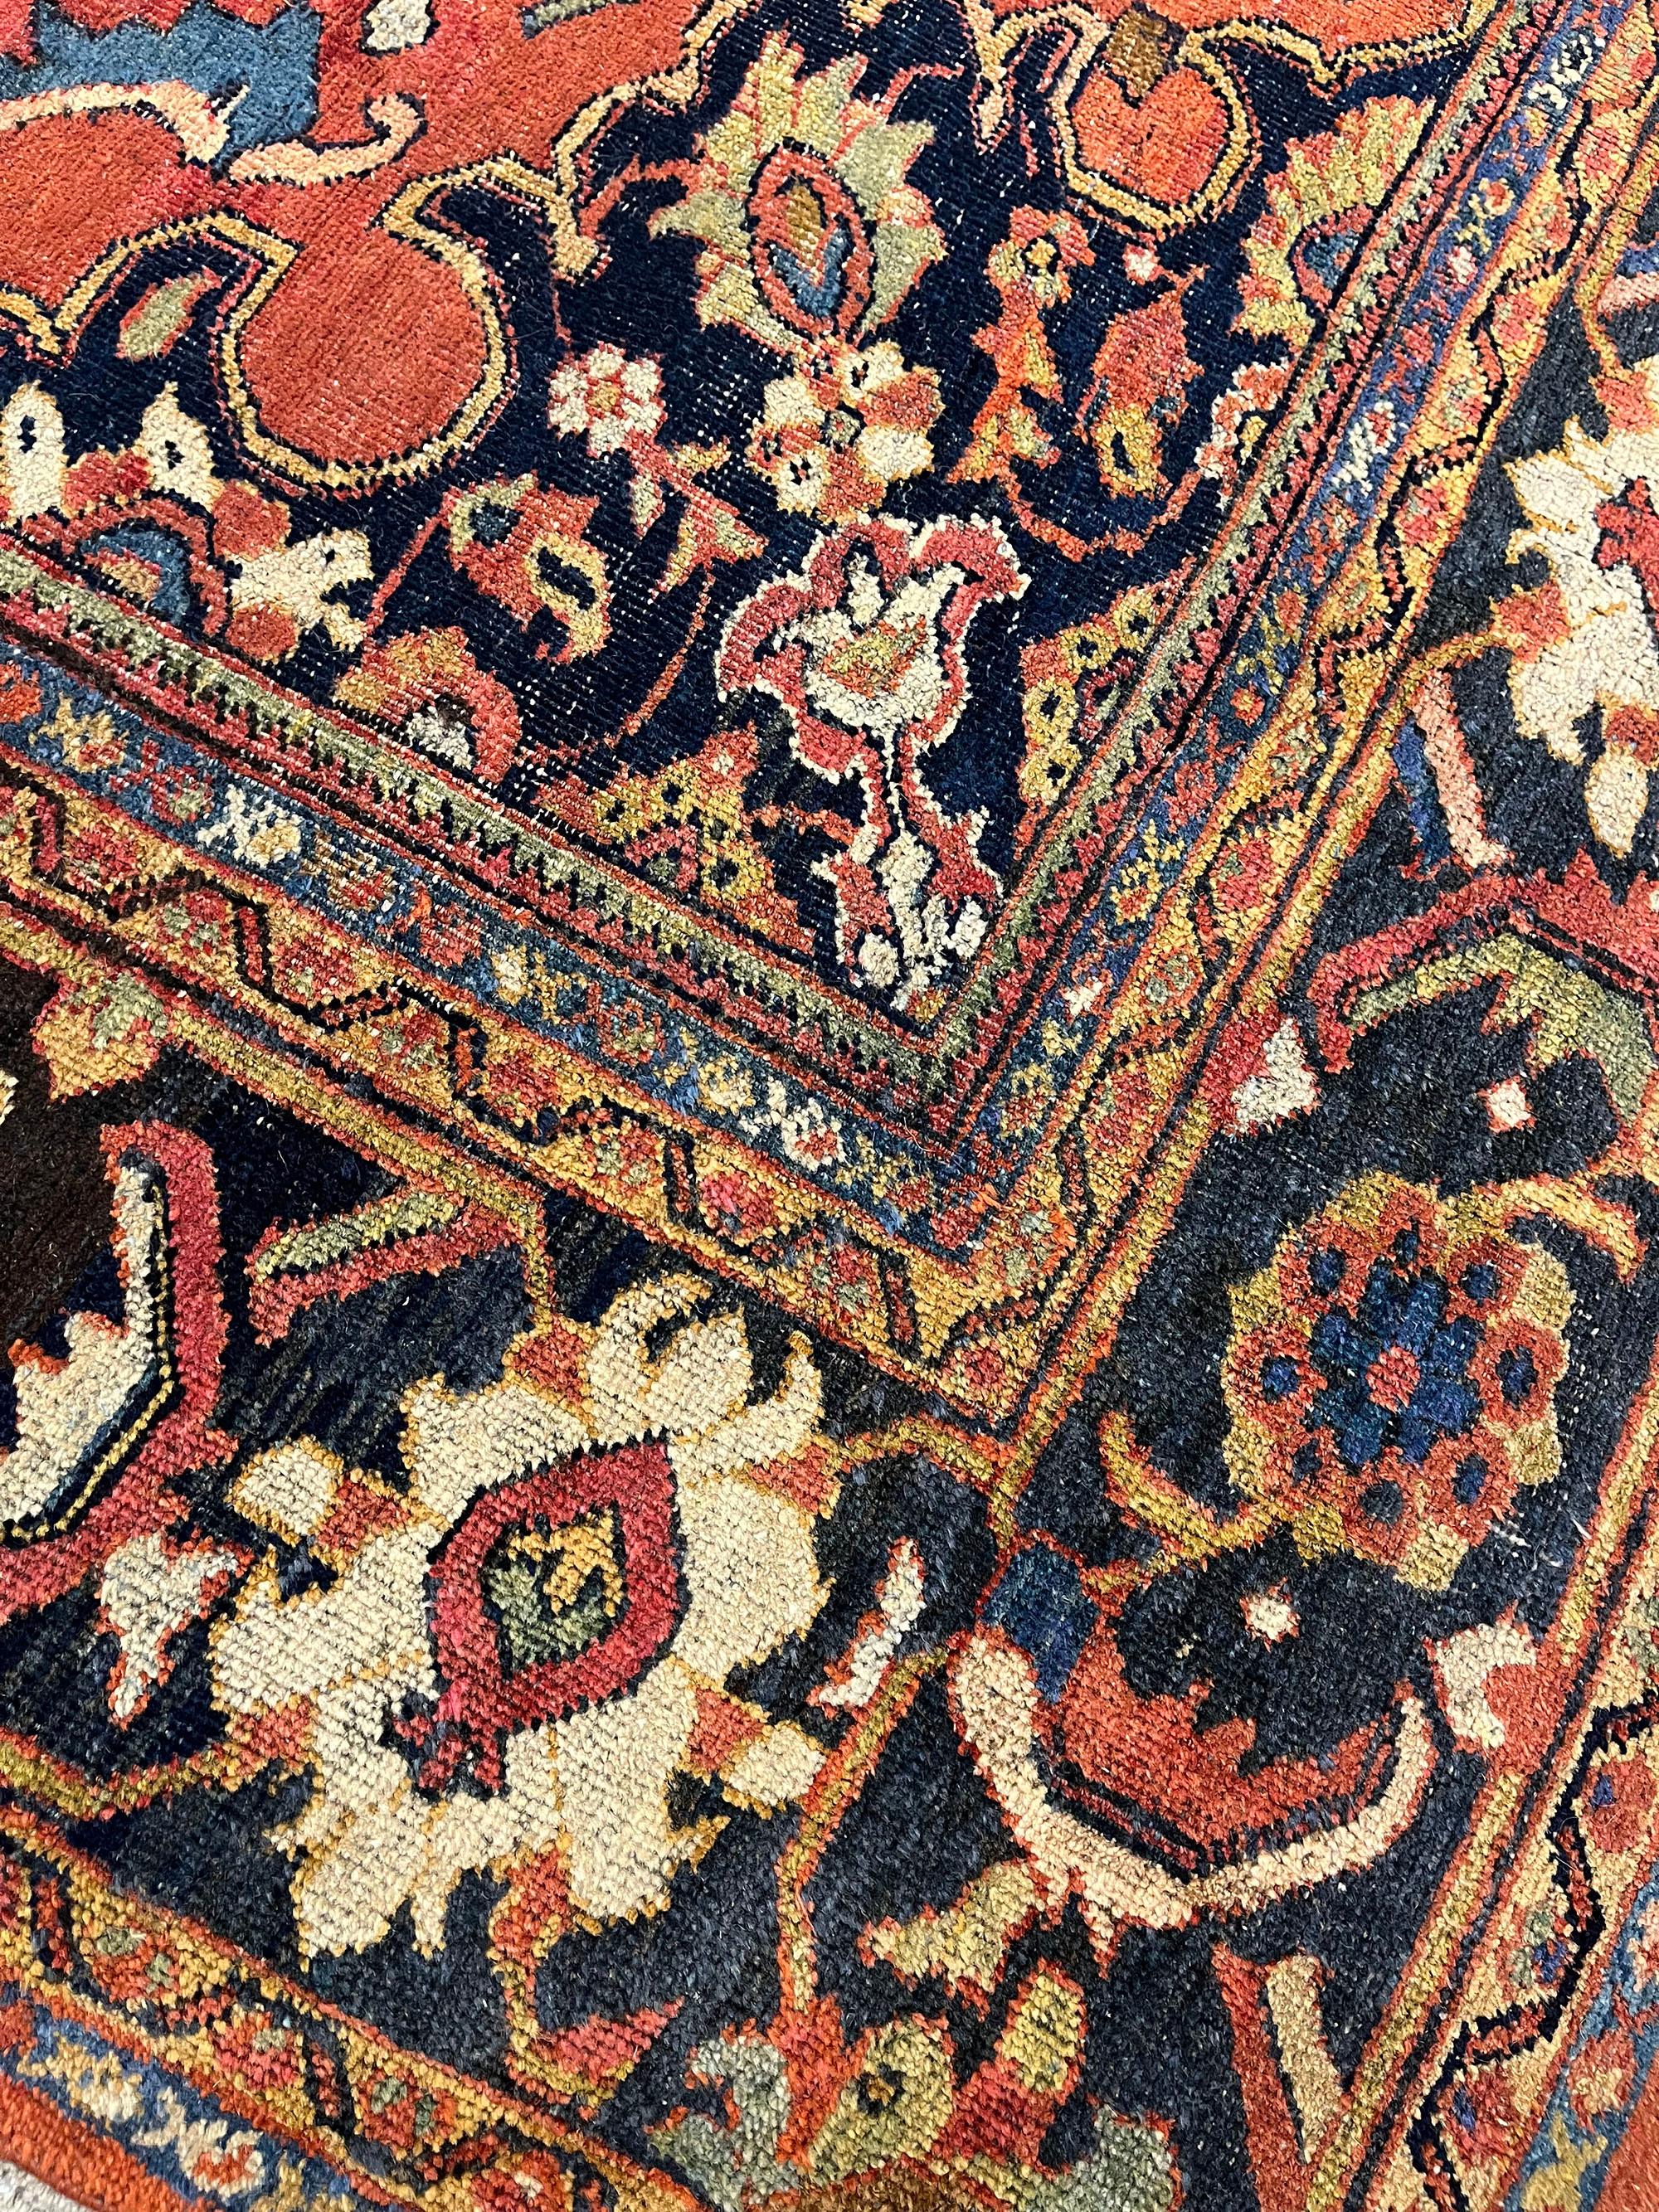 Antique Persian Mahal Rug, 9'2 x 12'8 For Sale 2